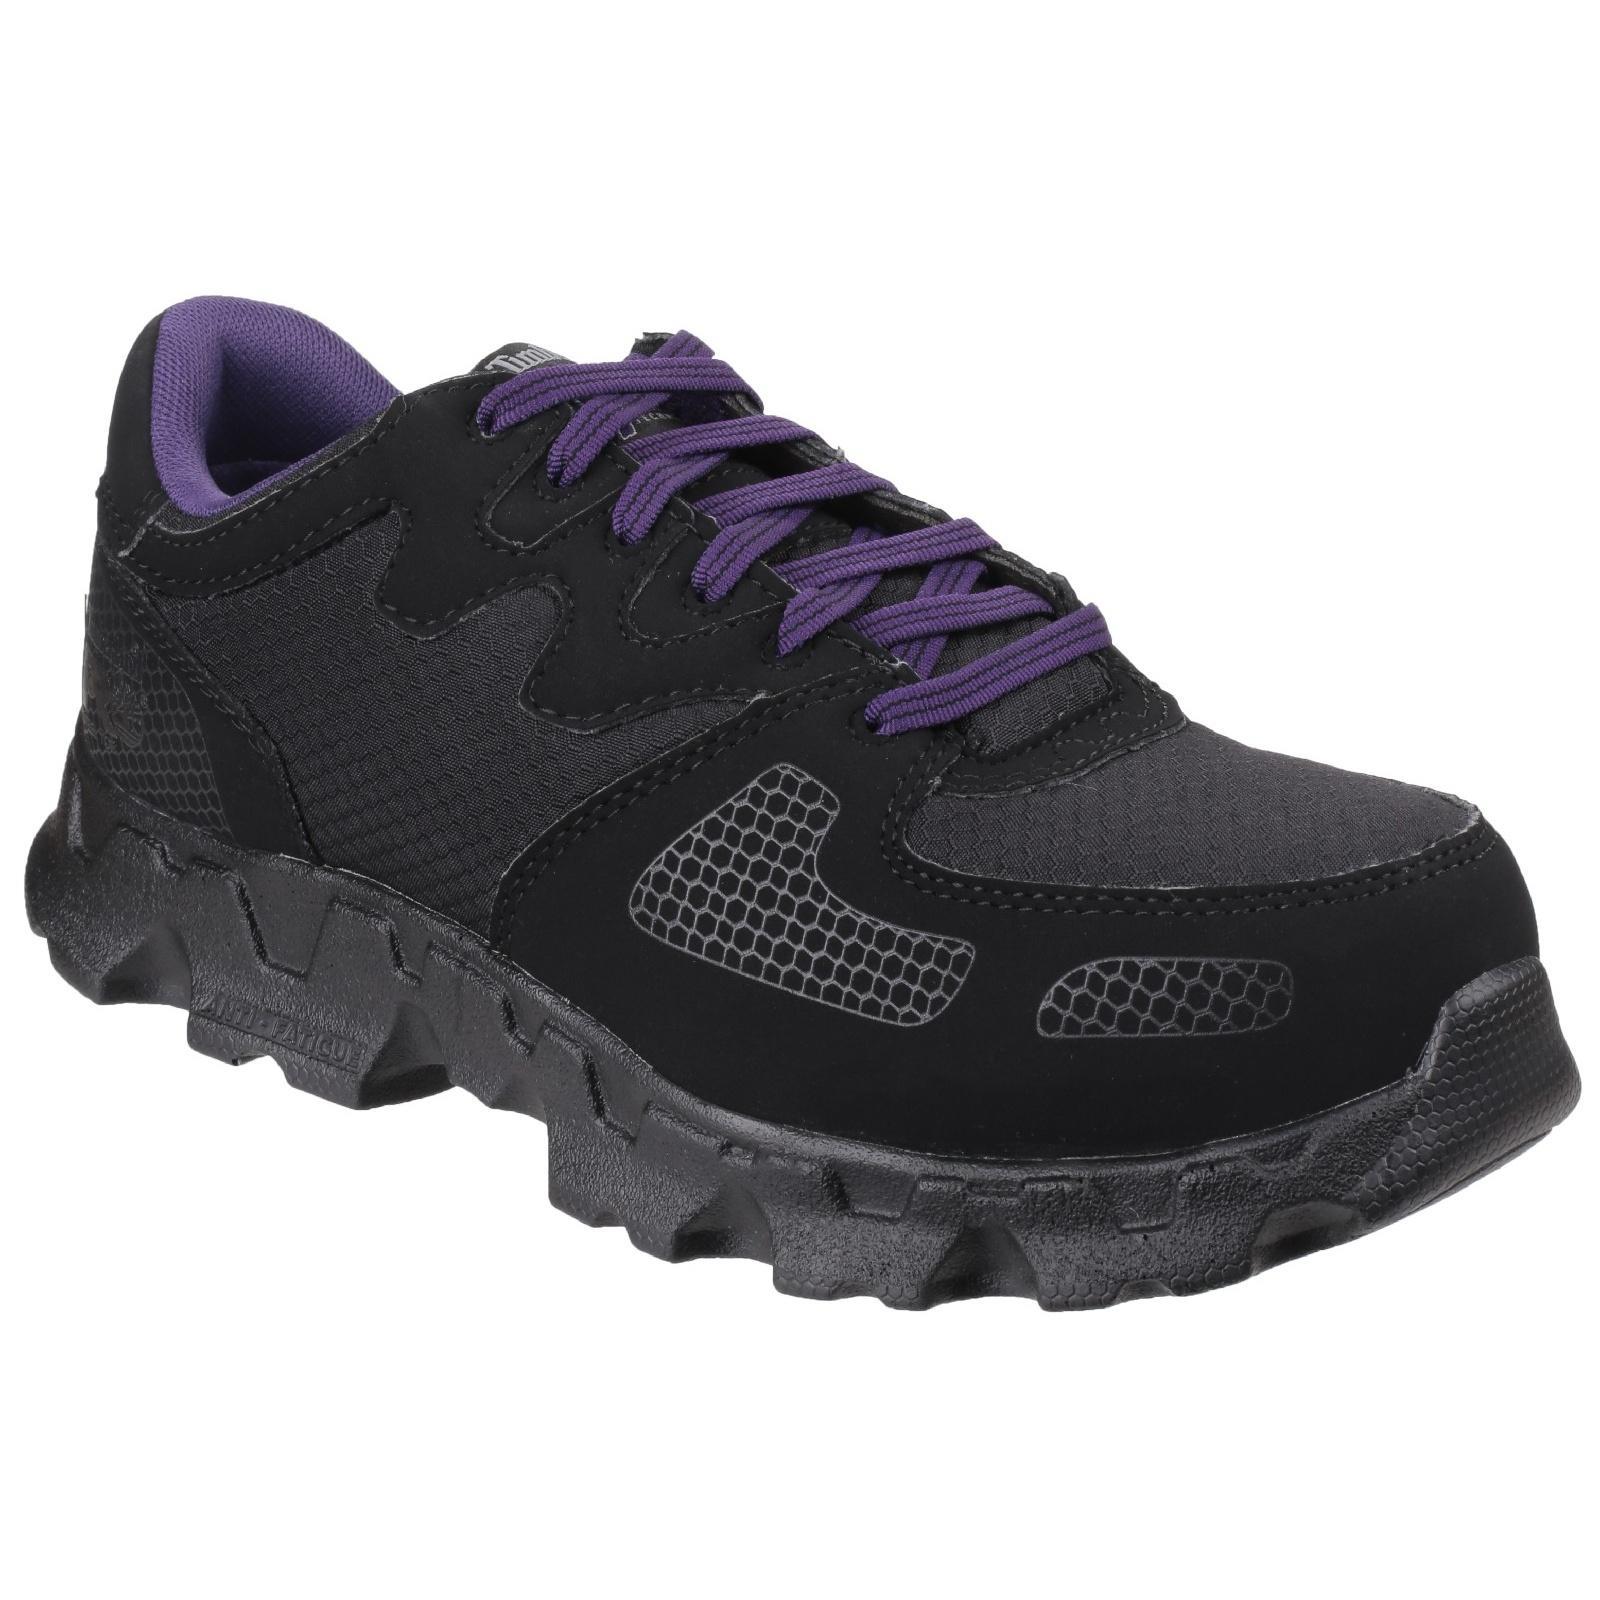 Timberland Pro Womens/Ladies Powertrain Low Lace Up Safety Shoes (Black) (5 UK)